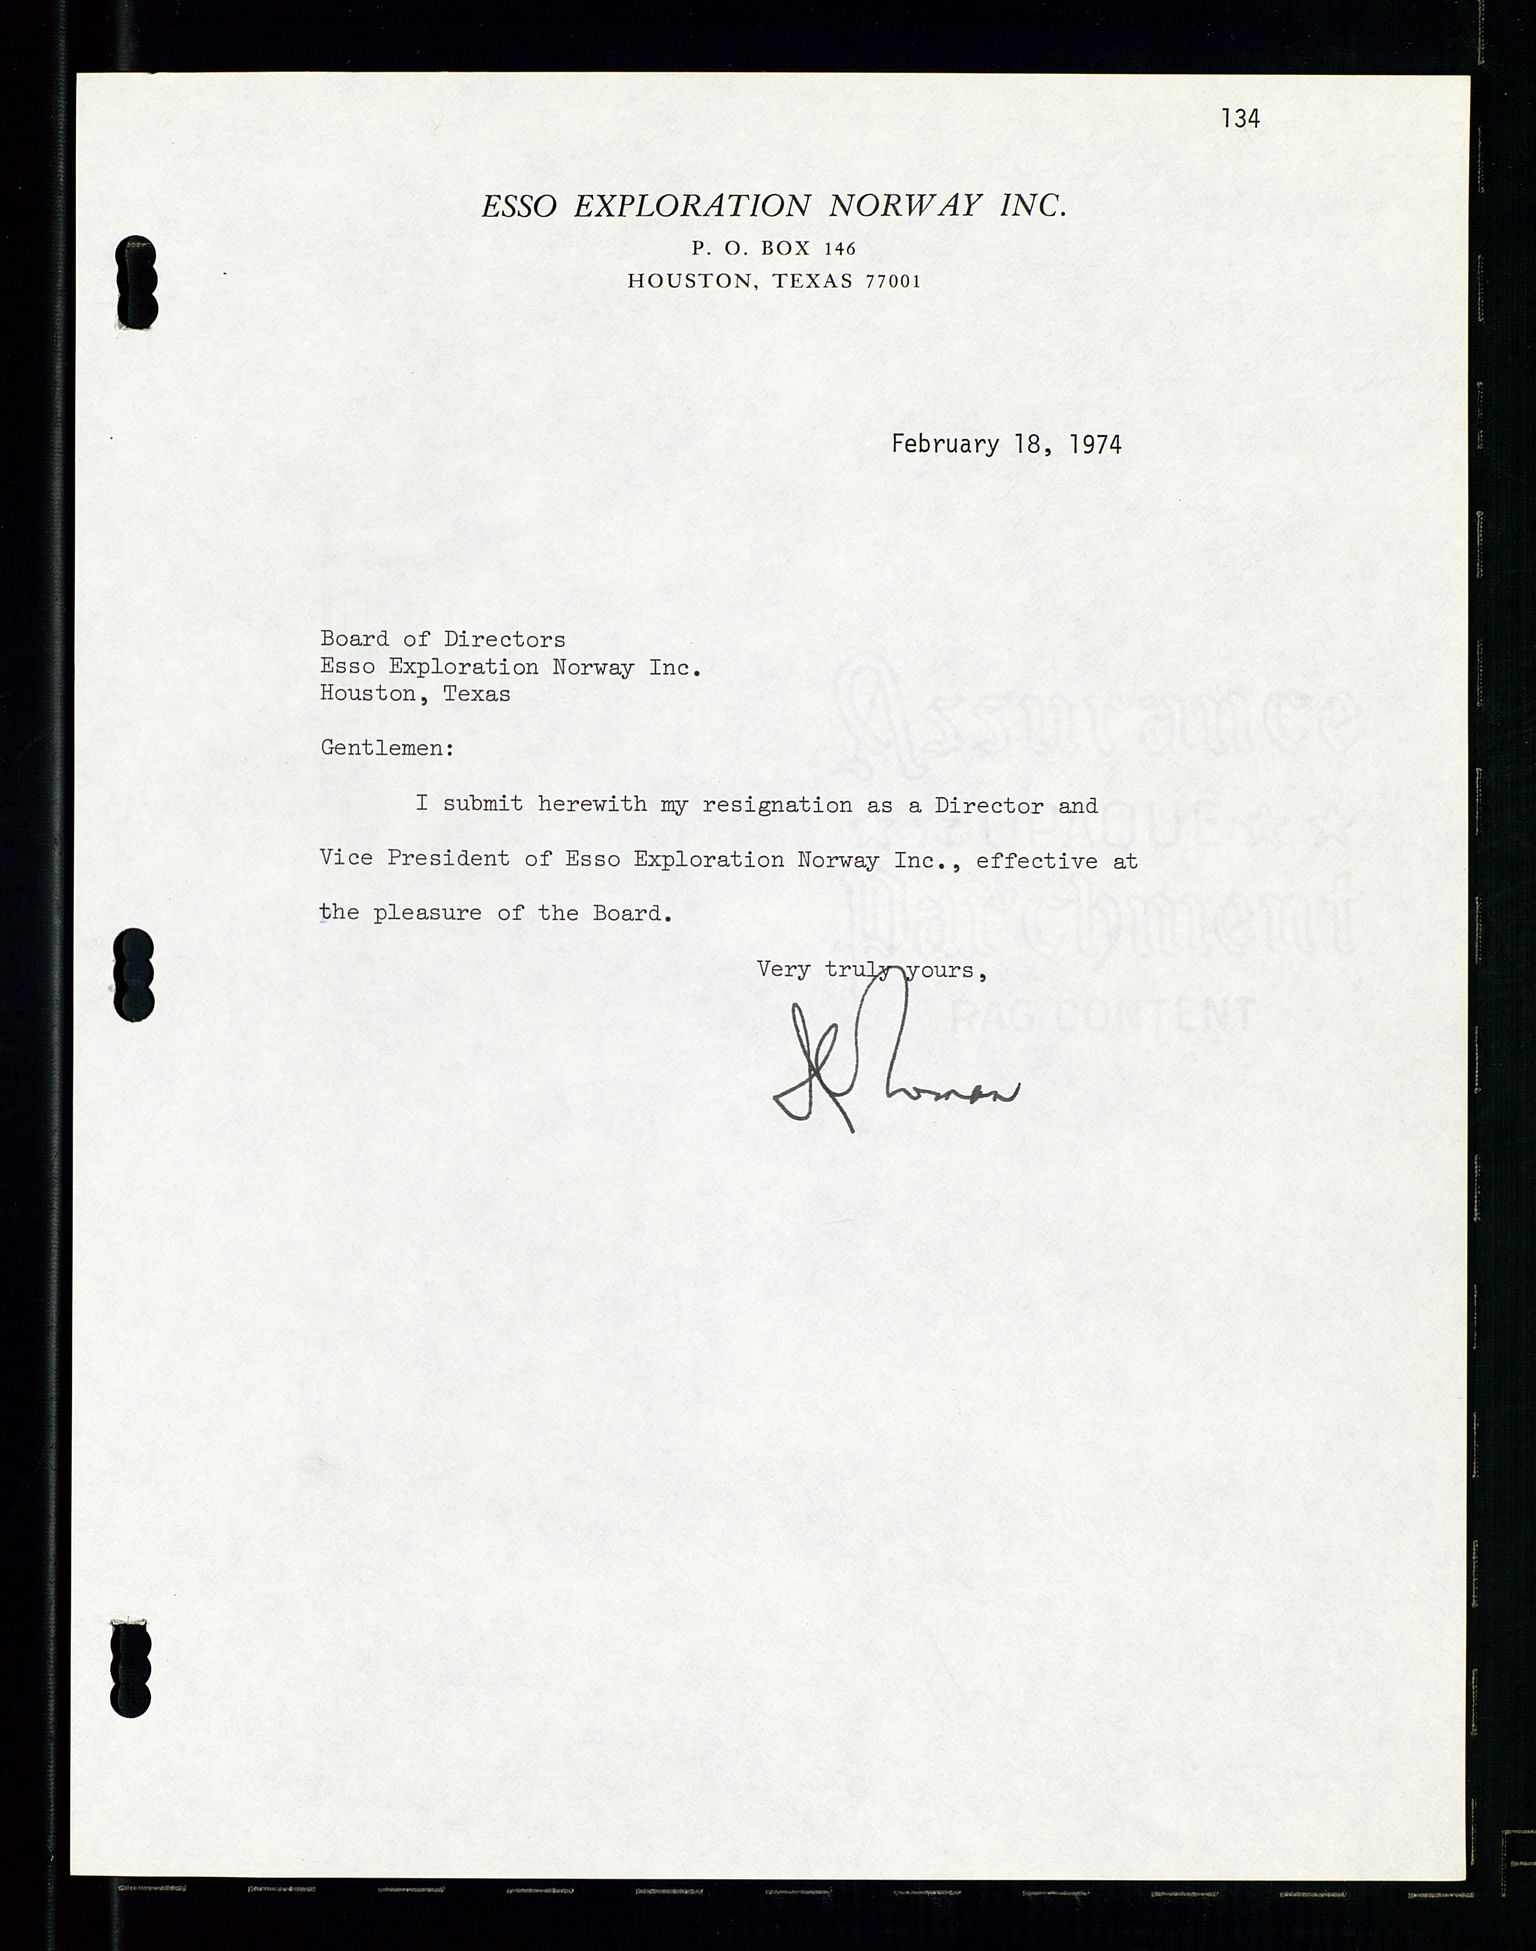 Pa 1512 - Esso Exploration and Production Norway Inc., SAST/A-101917/A/Aa/L0001/0001: Styredokumenter / Corporate records, By-Laws, Board meeting minutes, Incorporations, 1965-1975, p. 134